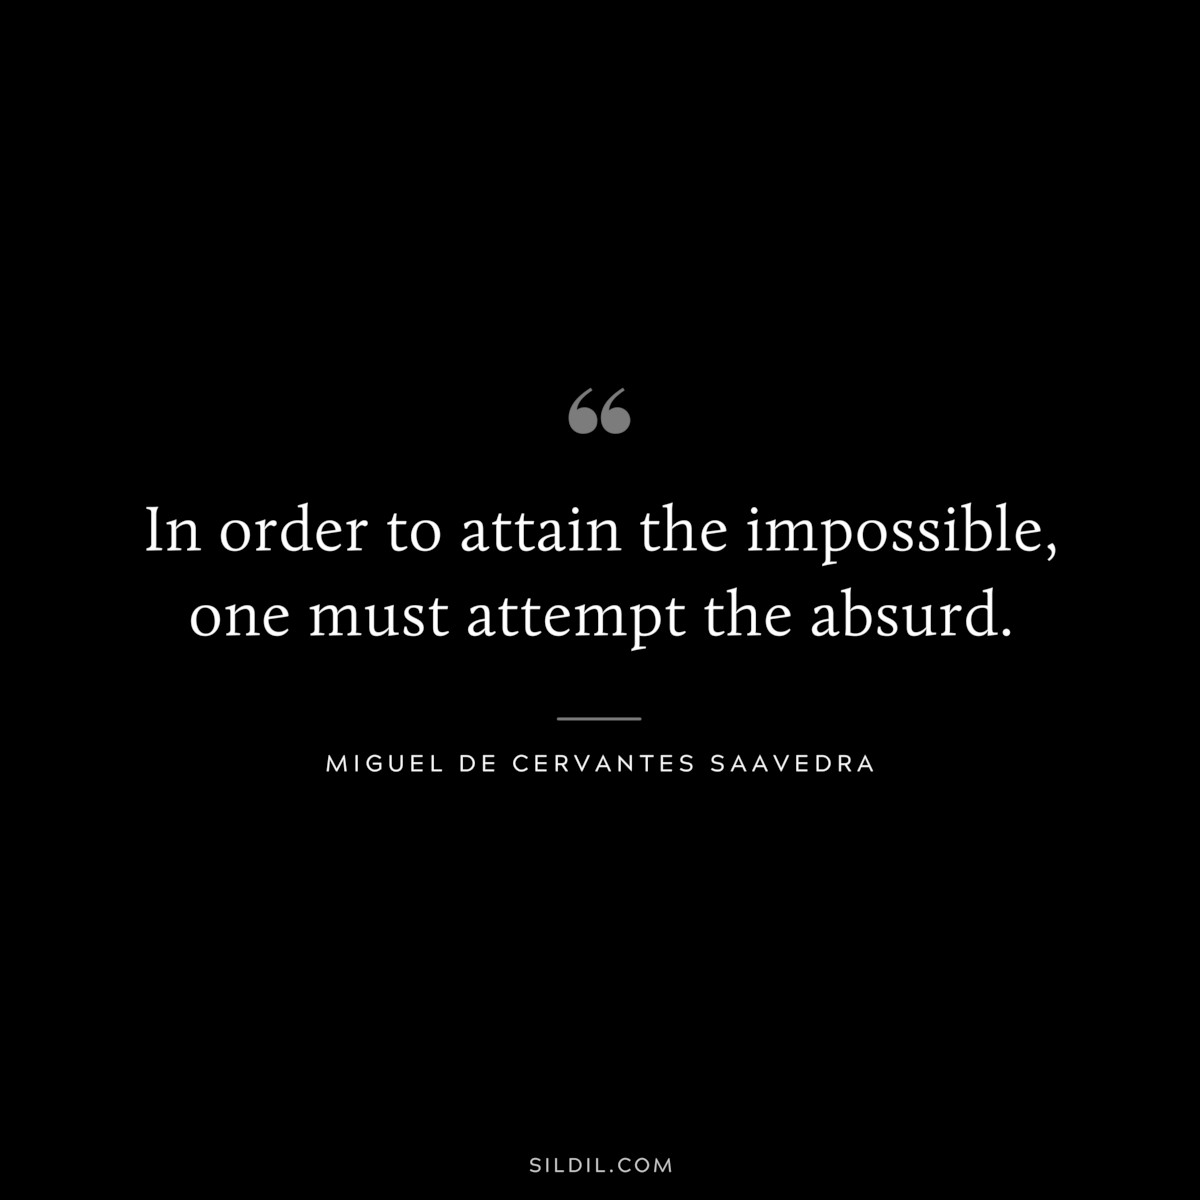 In order to attain the impossible, one must attempt the absurd. ― Miguel de Cervantes Saavedra